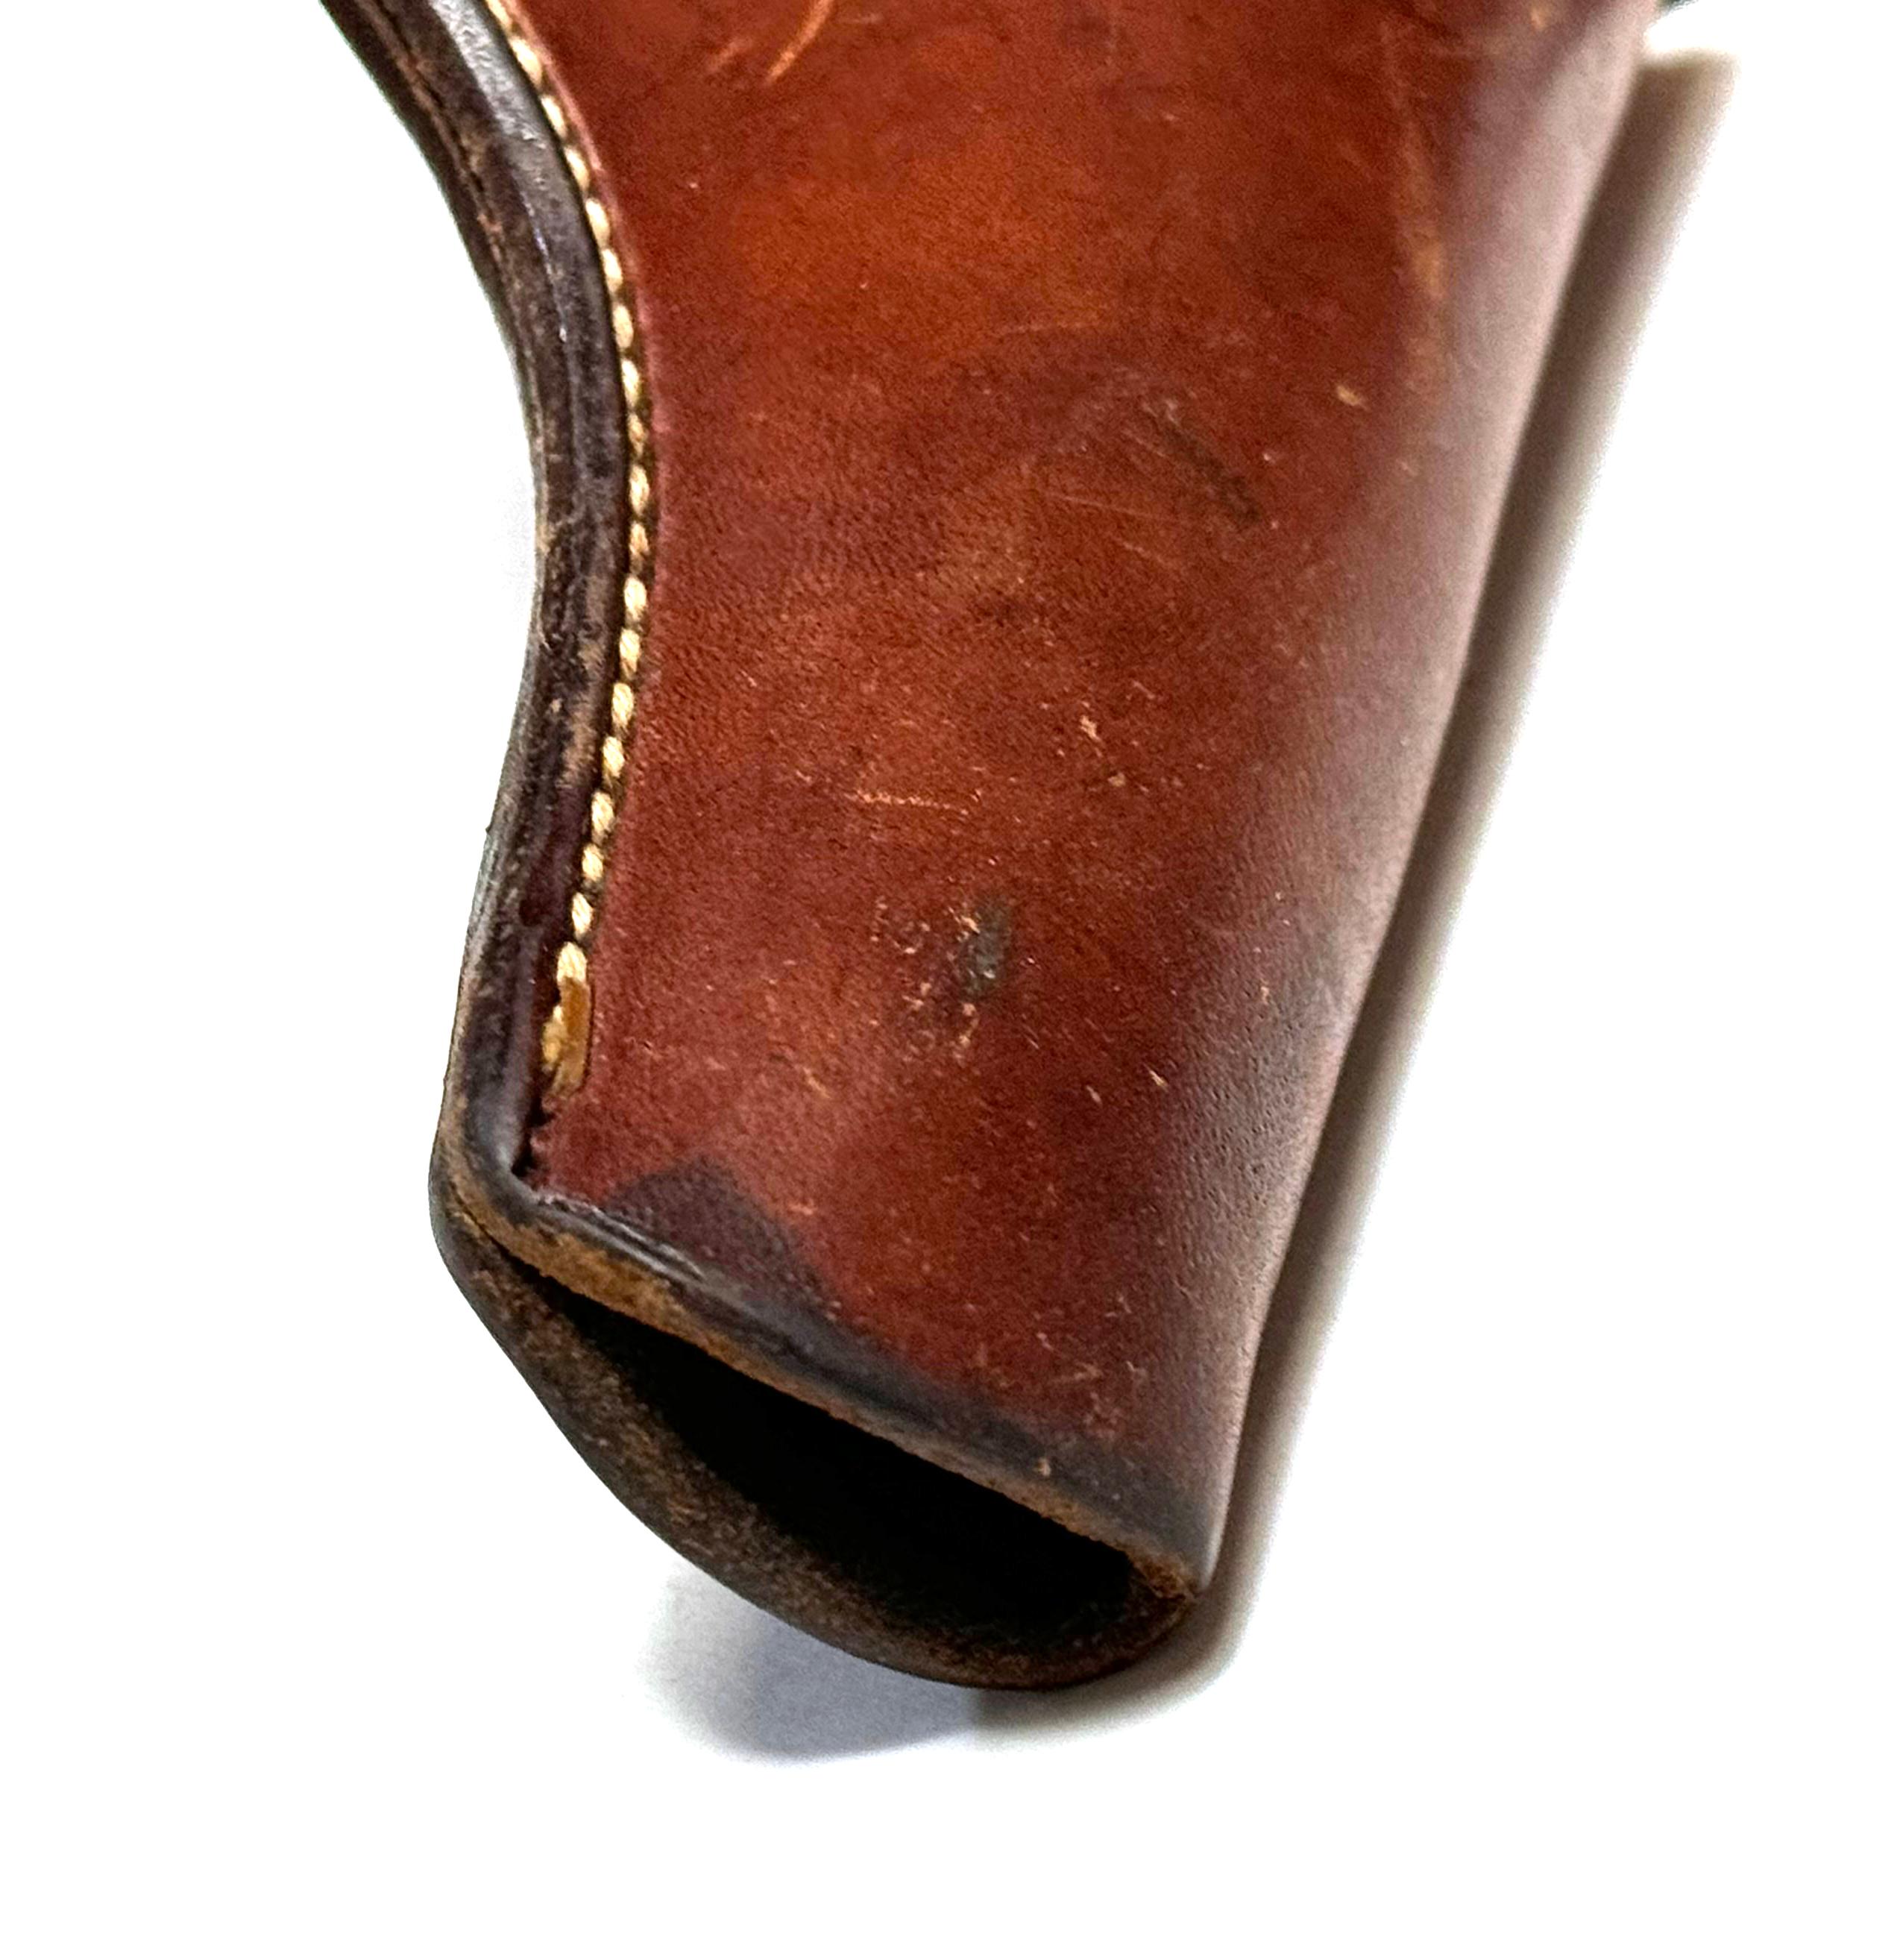 Vintage Leather Flap Holster and Knife Sheath 